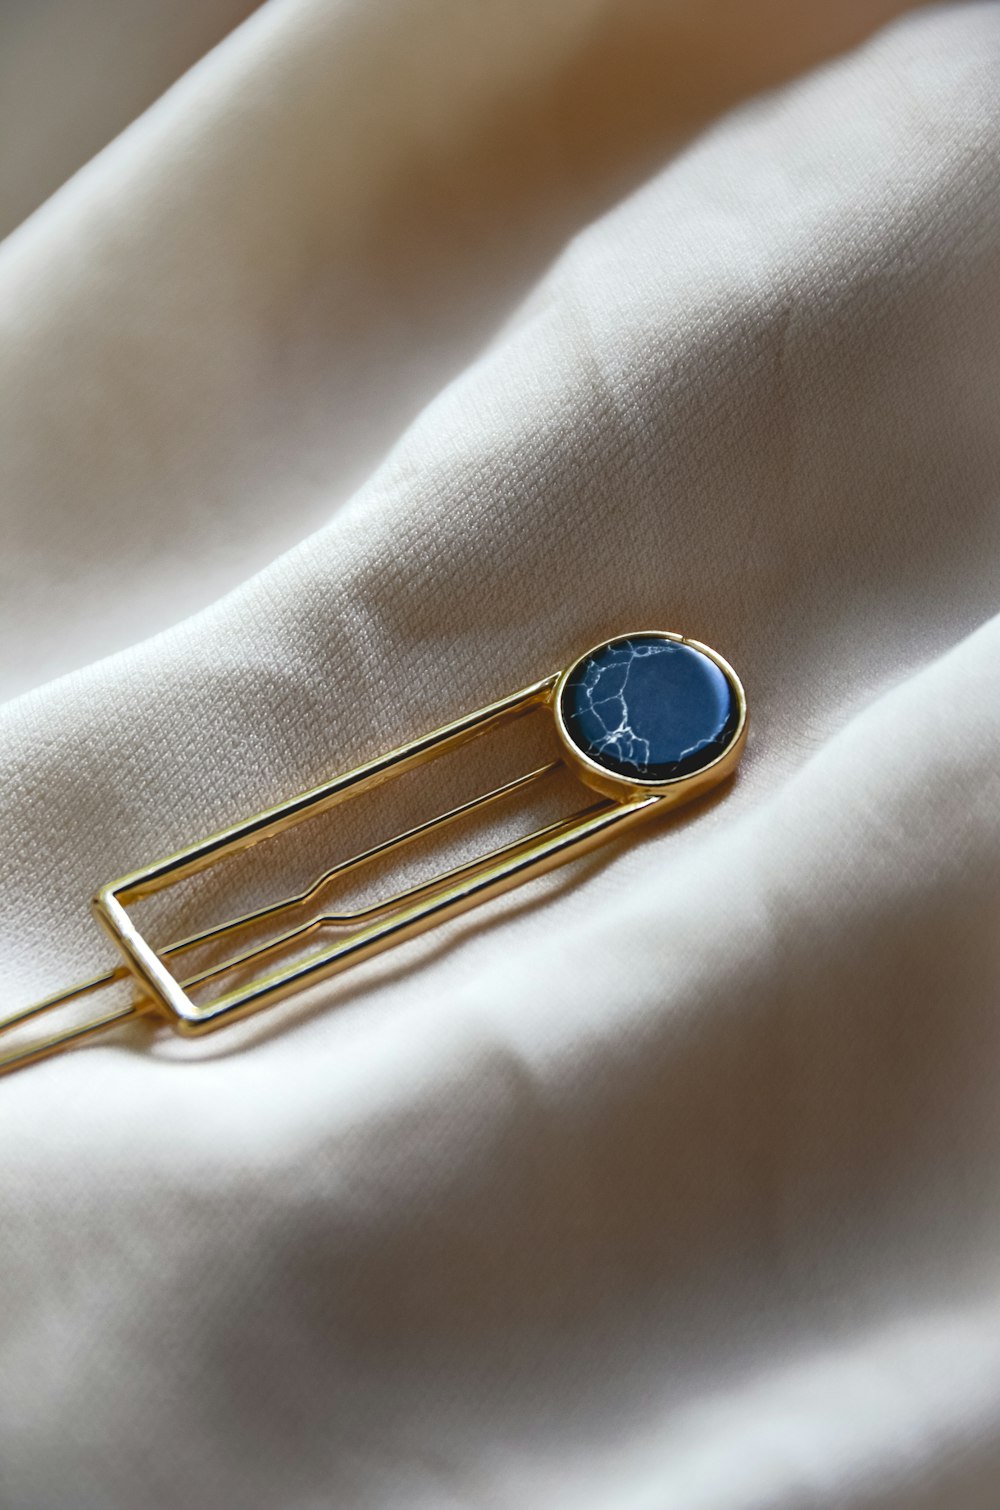 a lapel pin with a blue stone on it